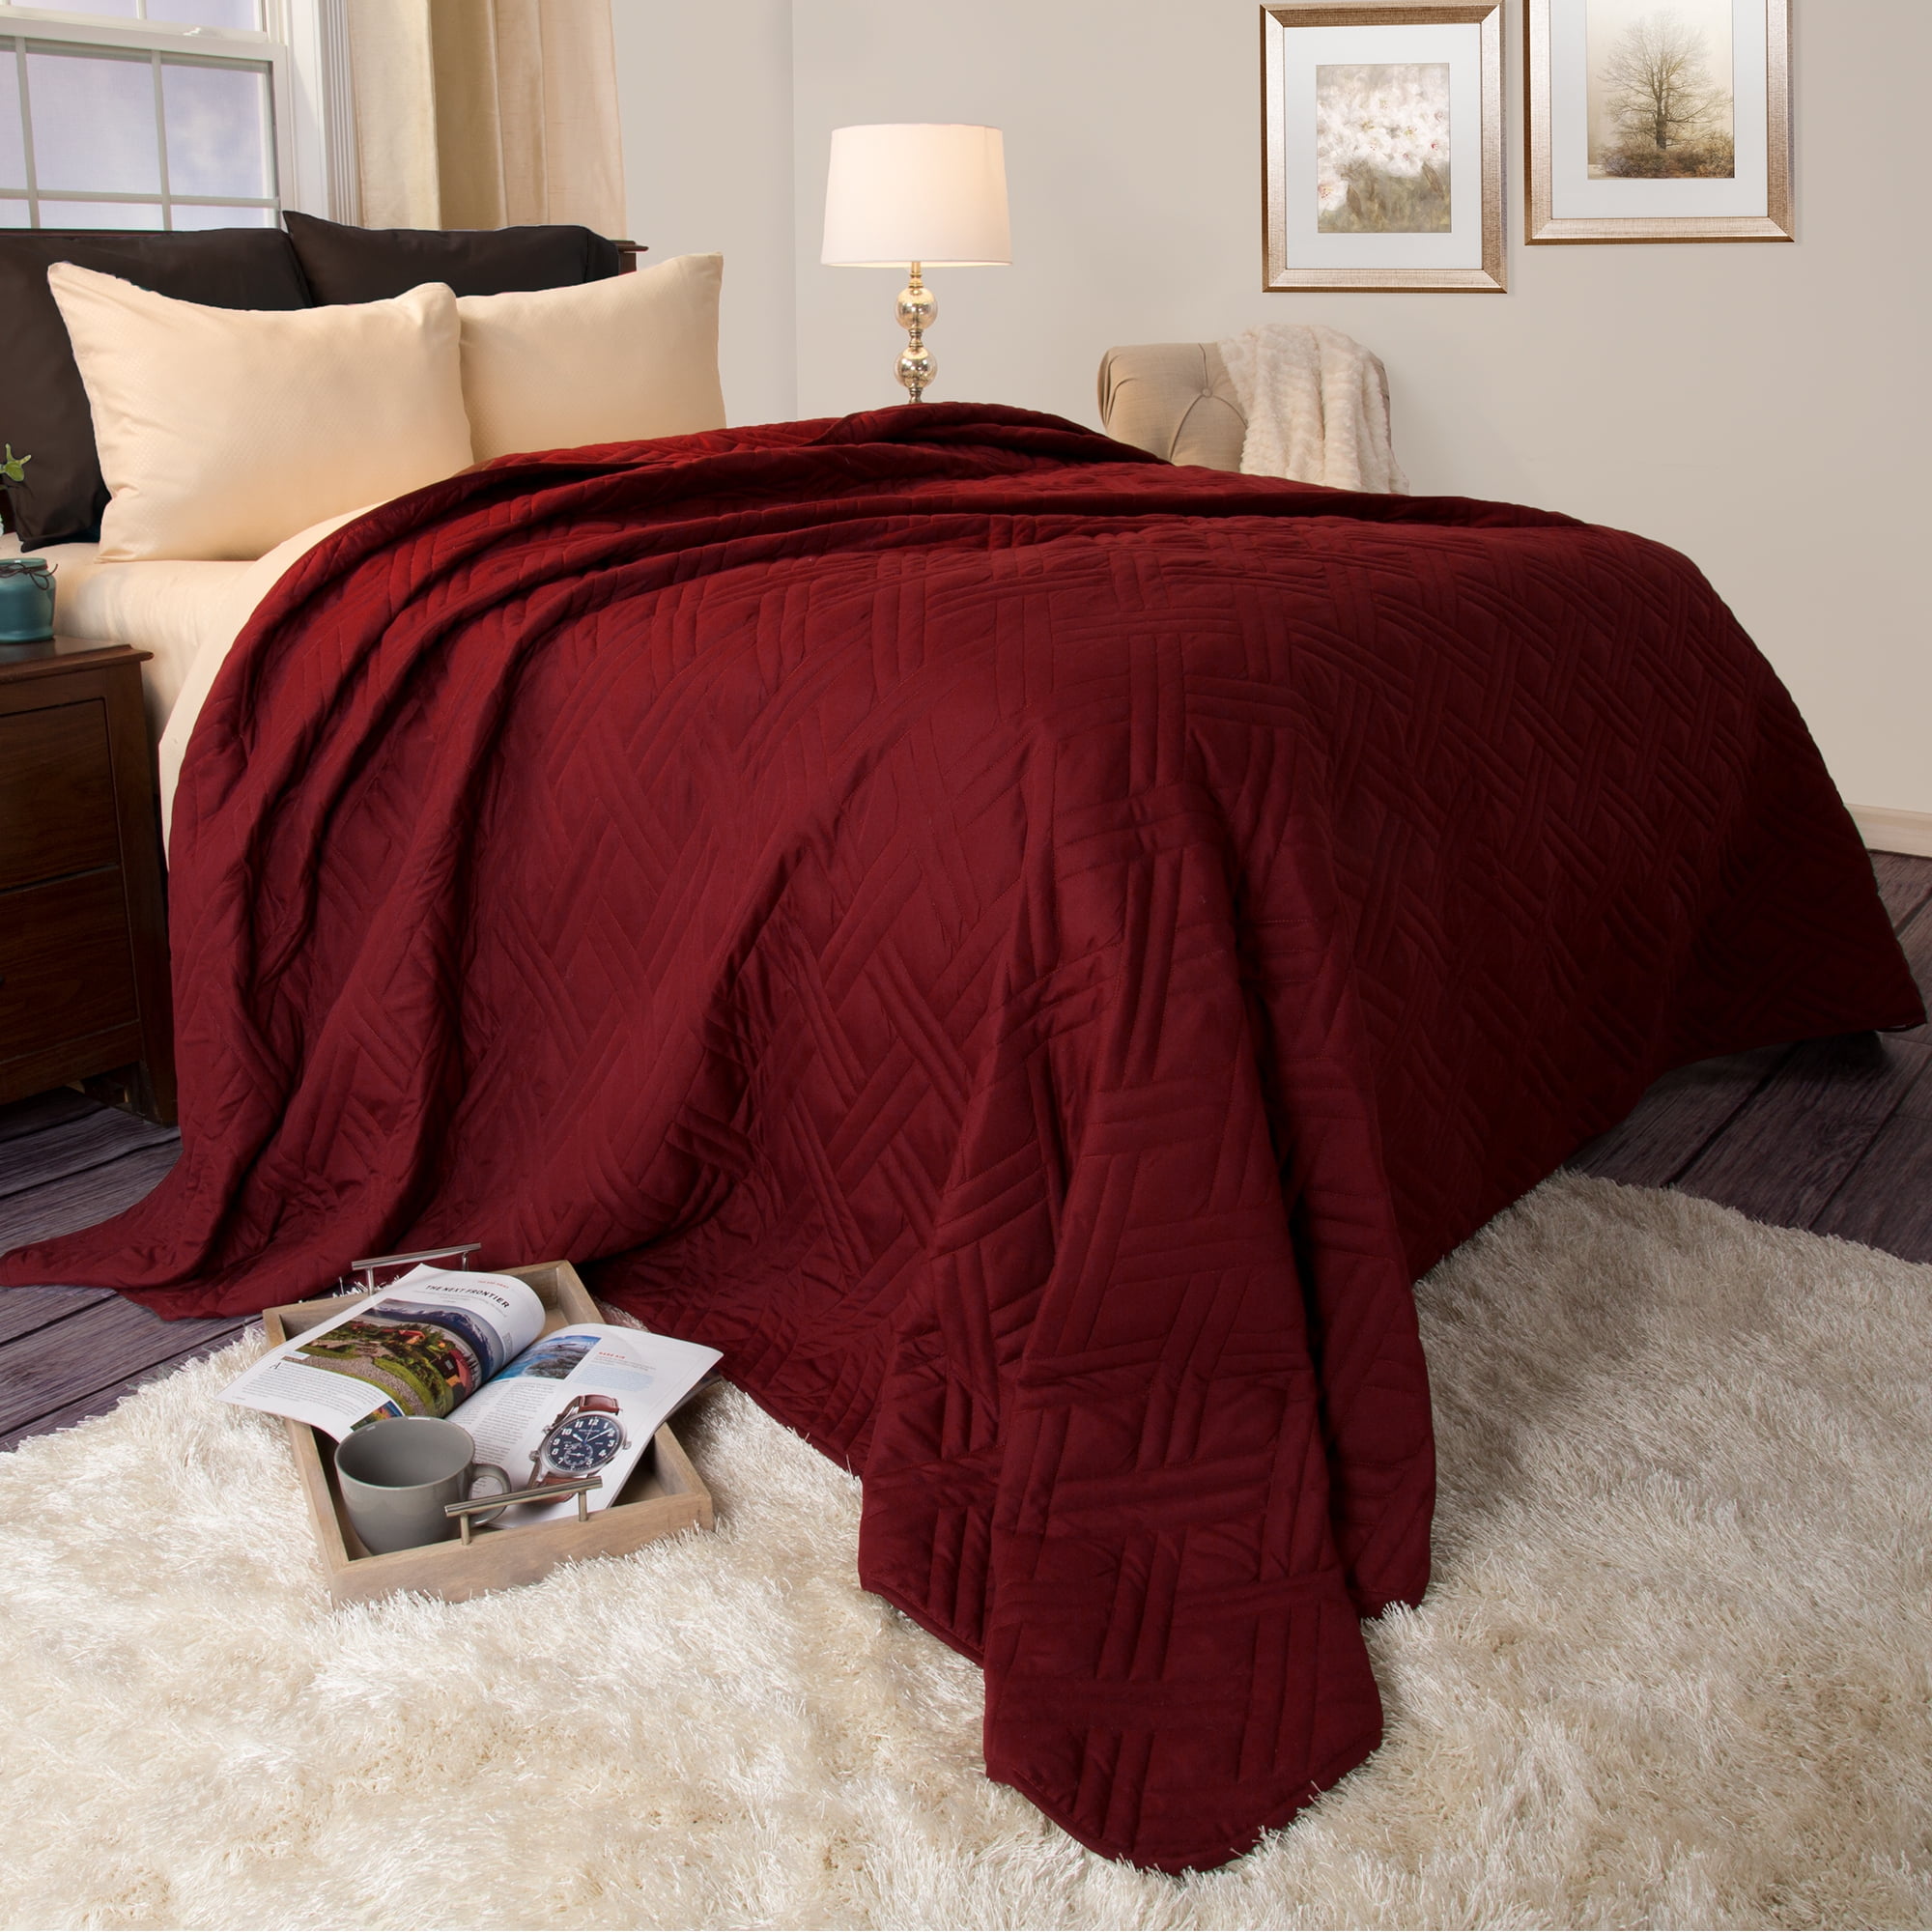 Details about   Tremendous All Season Down Alternative Comforter Wine Solid US Full Size 